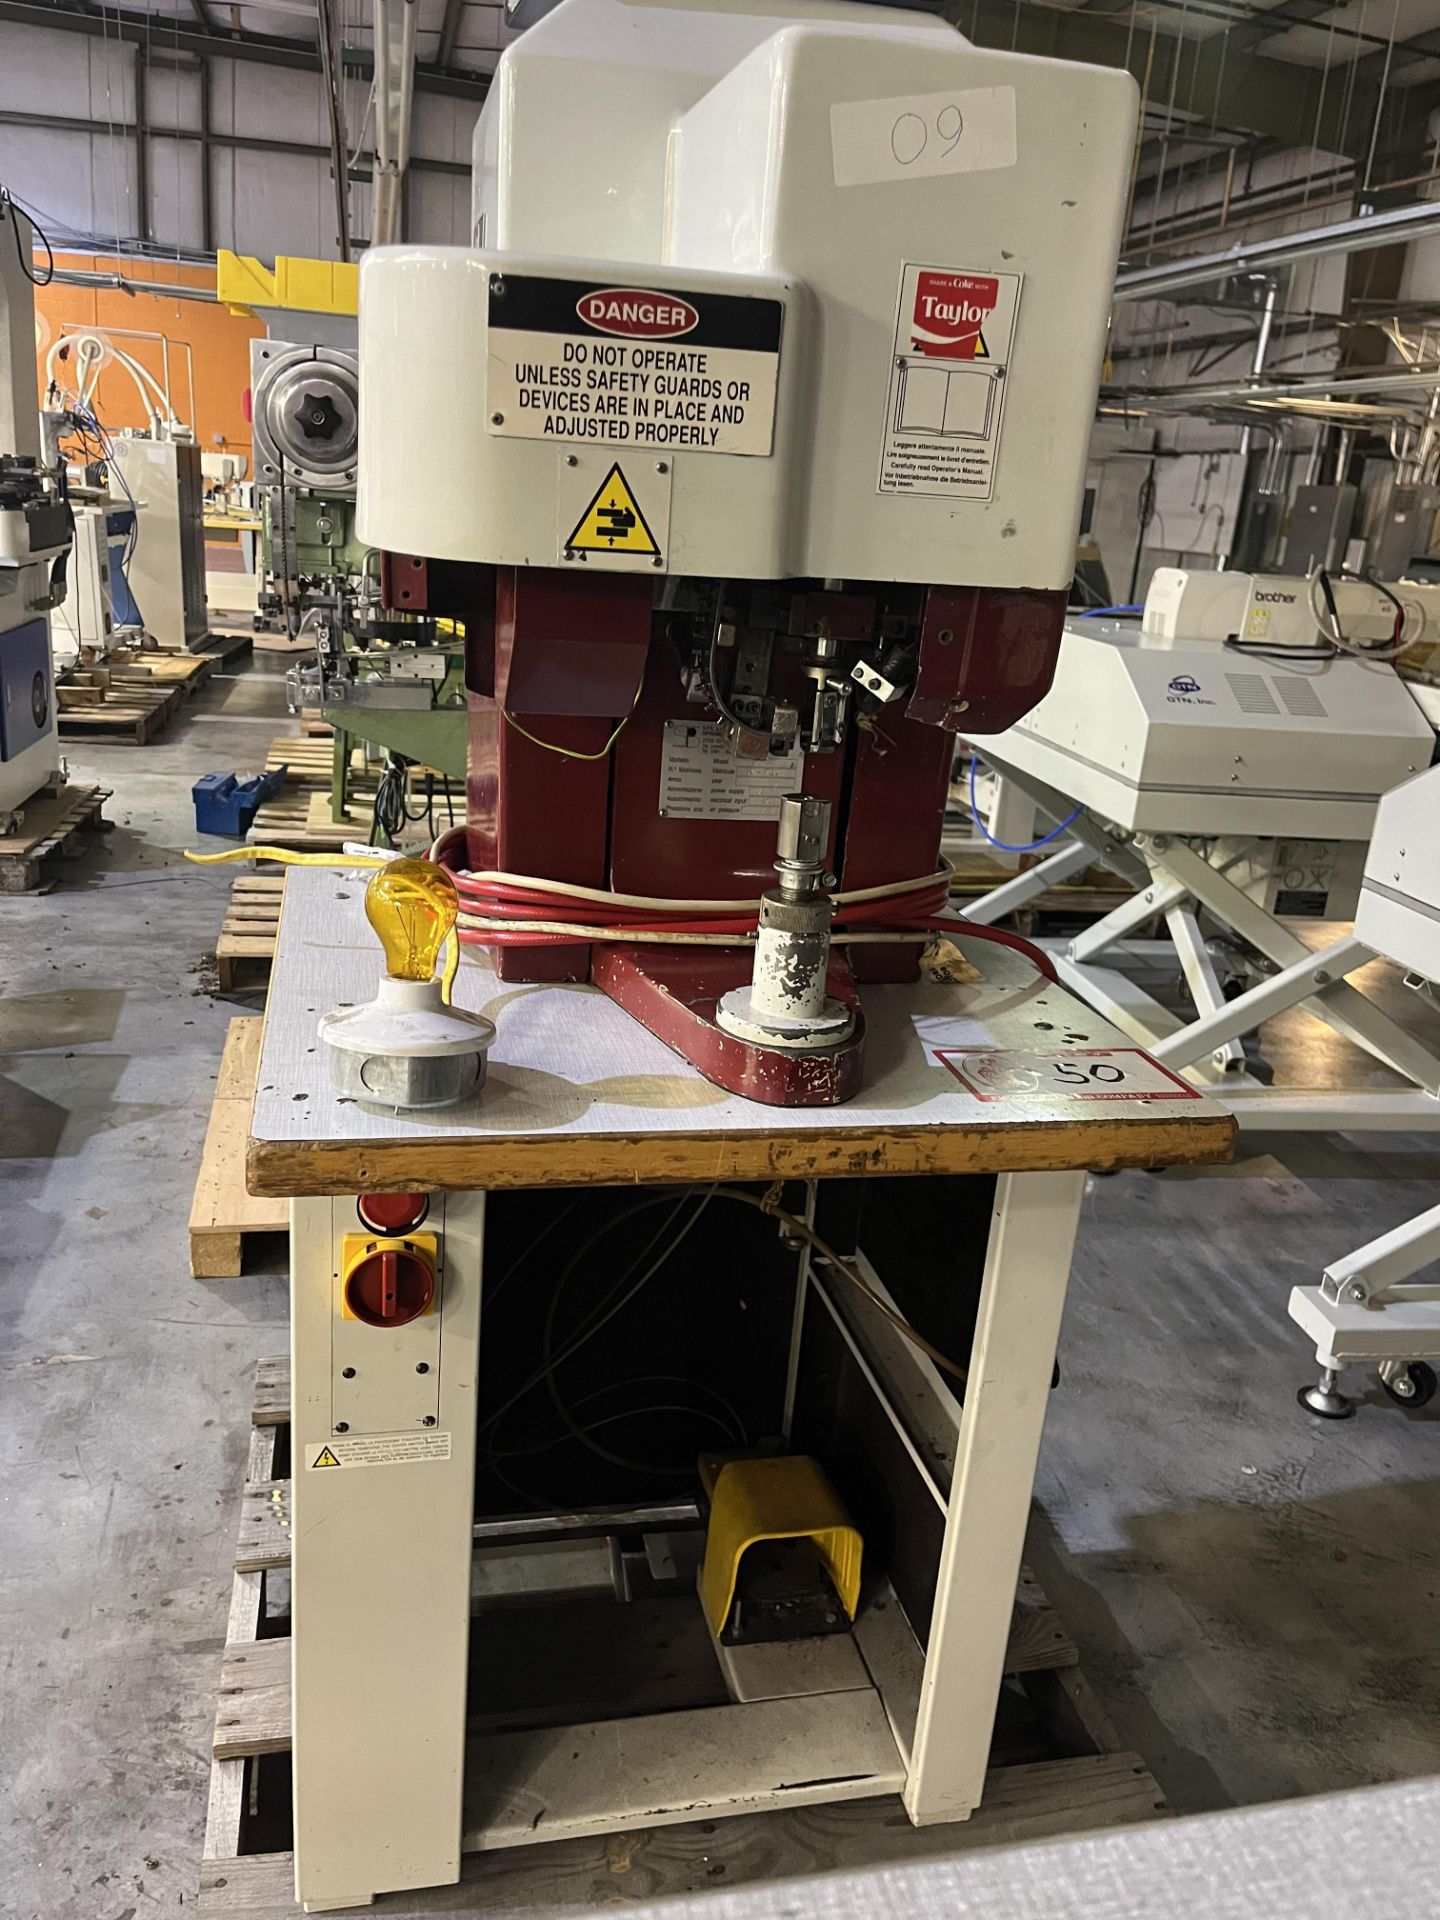 Pamco Model 1570-S-03AE Hook Letting Machine in Good, Working Condition, S/N 64-704 - Image 2 of 8